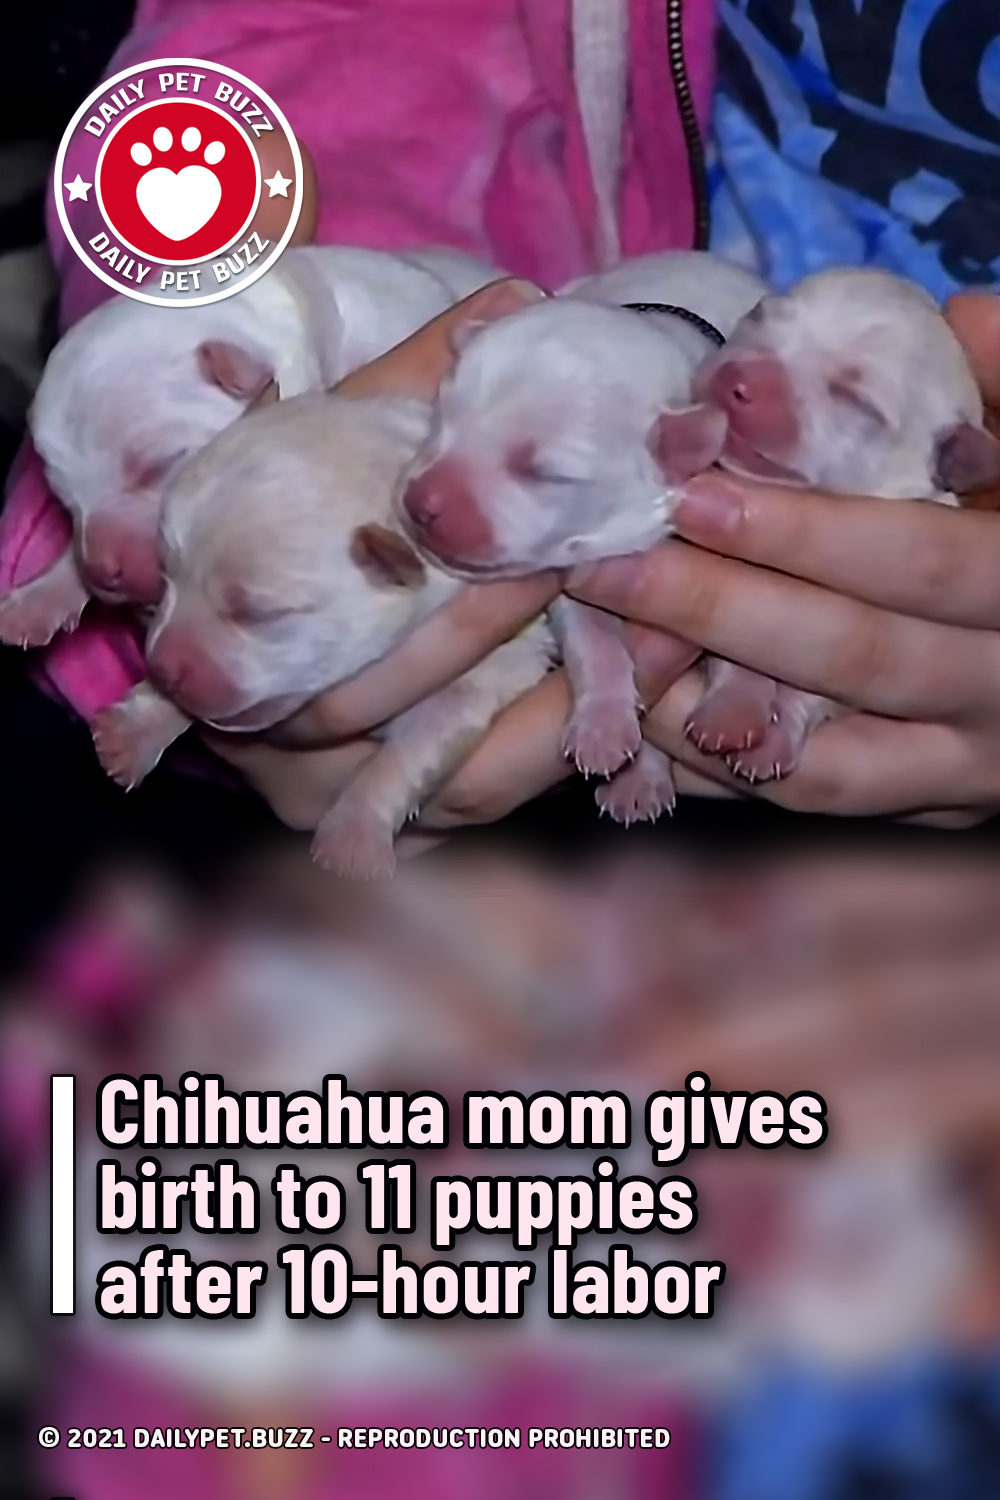 Chihuahua mom gives birth to 11 puppies after 10-hour labor